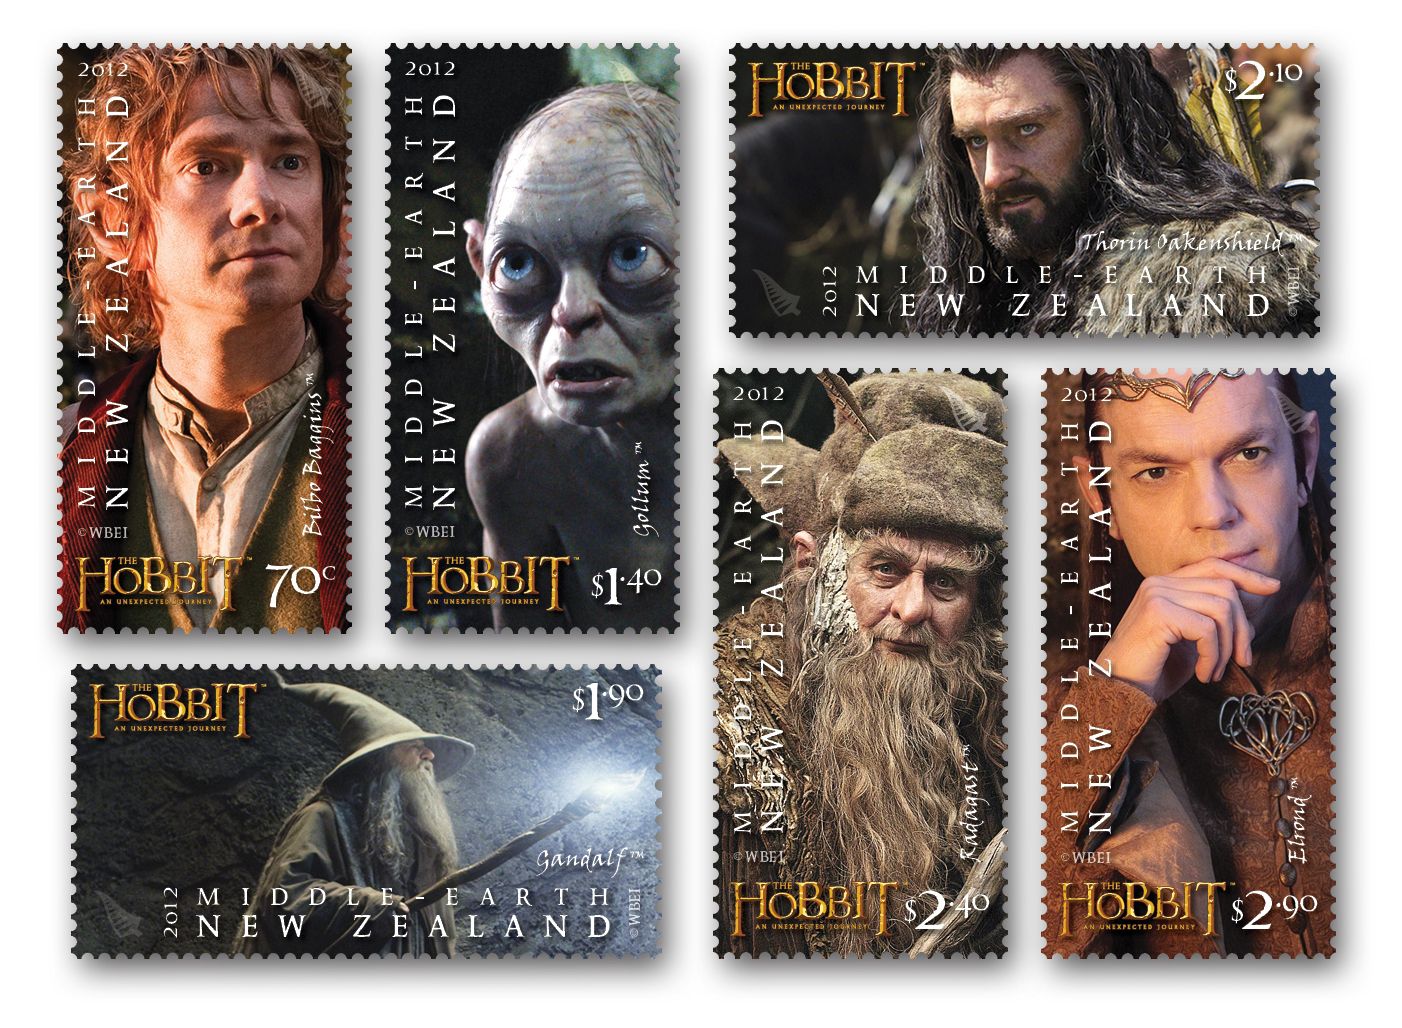 The Hobbit can't match Rings in Oscars nominations - NZ Herald